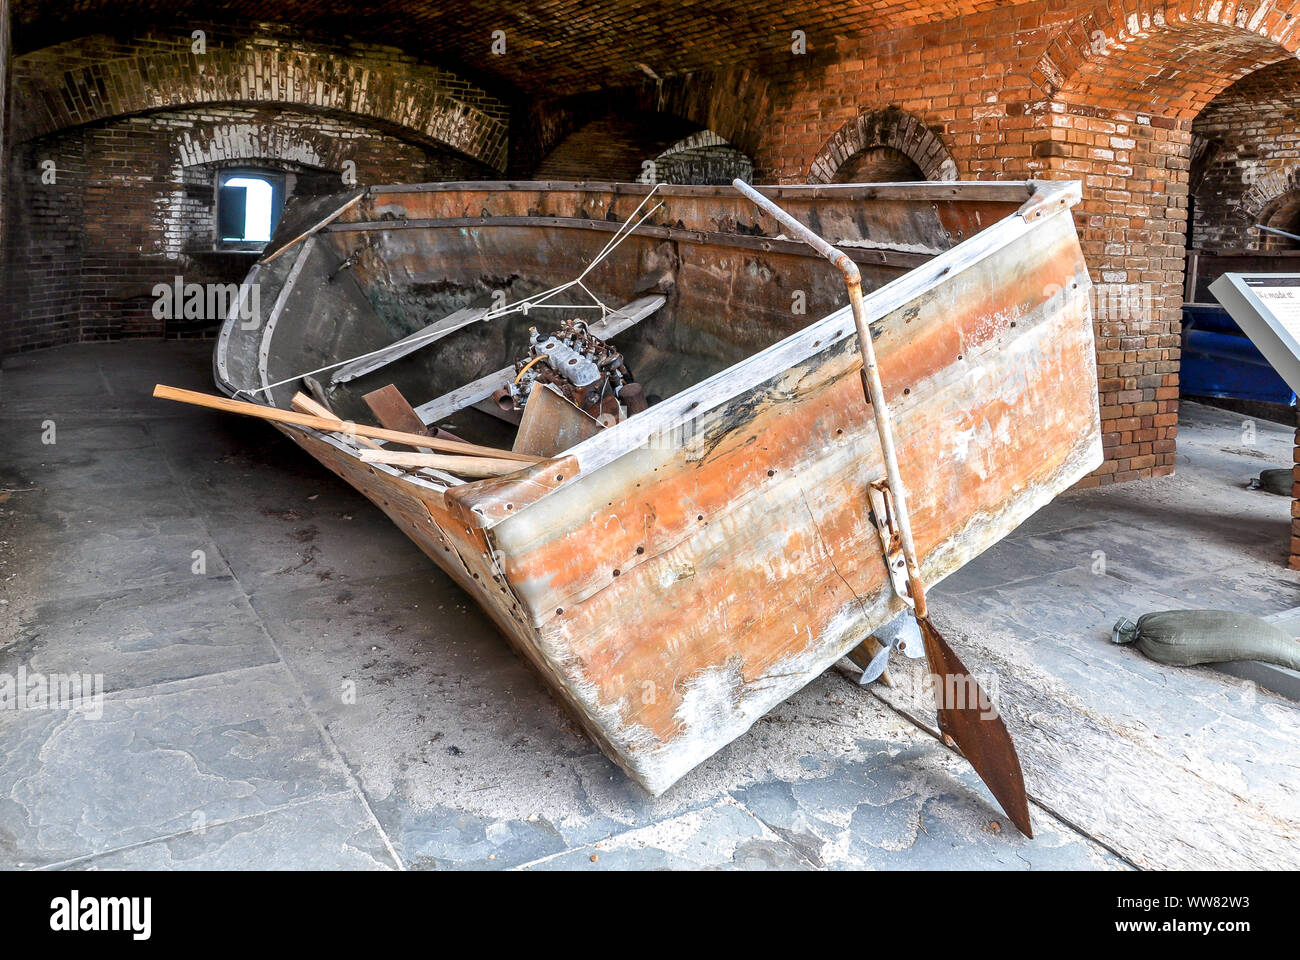 A balsa cubana boat used by 33 Cubans to cross from Cuba to Loggerhead Key in 2007, qualifying for dry foot immigration. On display at Fort Jefferson. Stock Photo